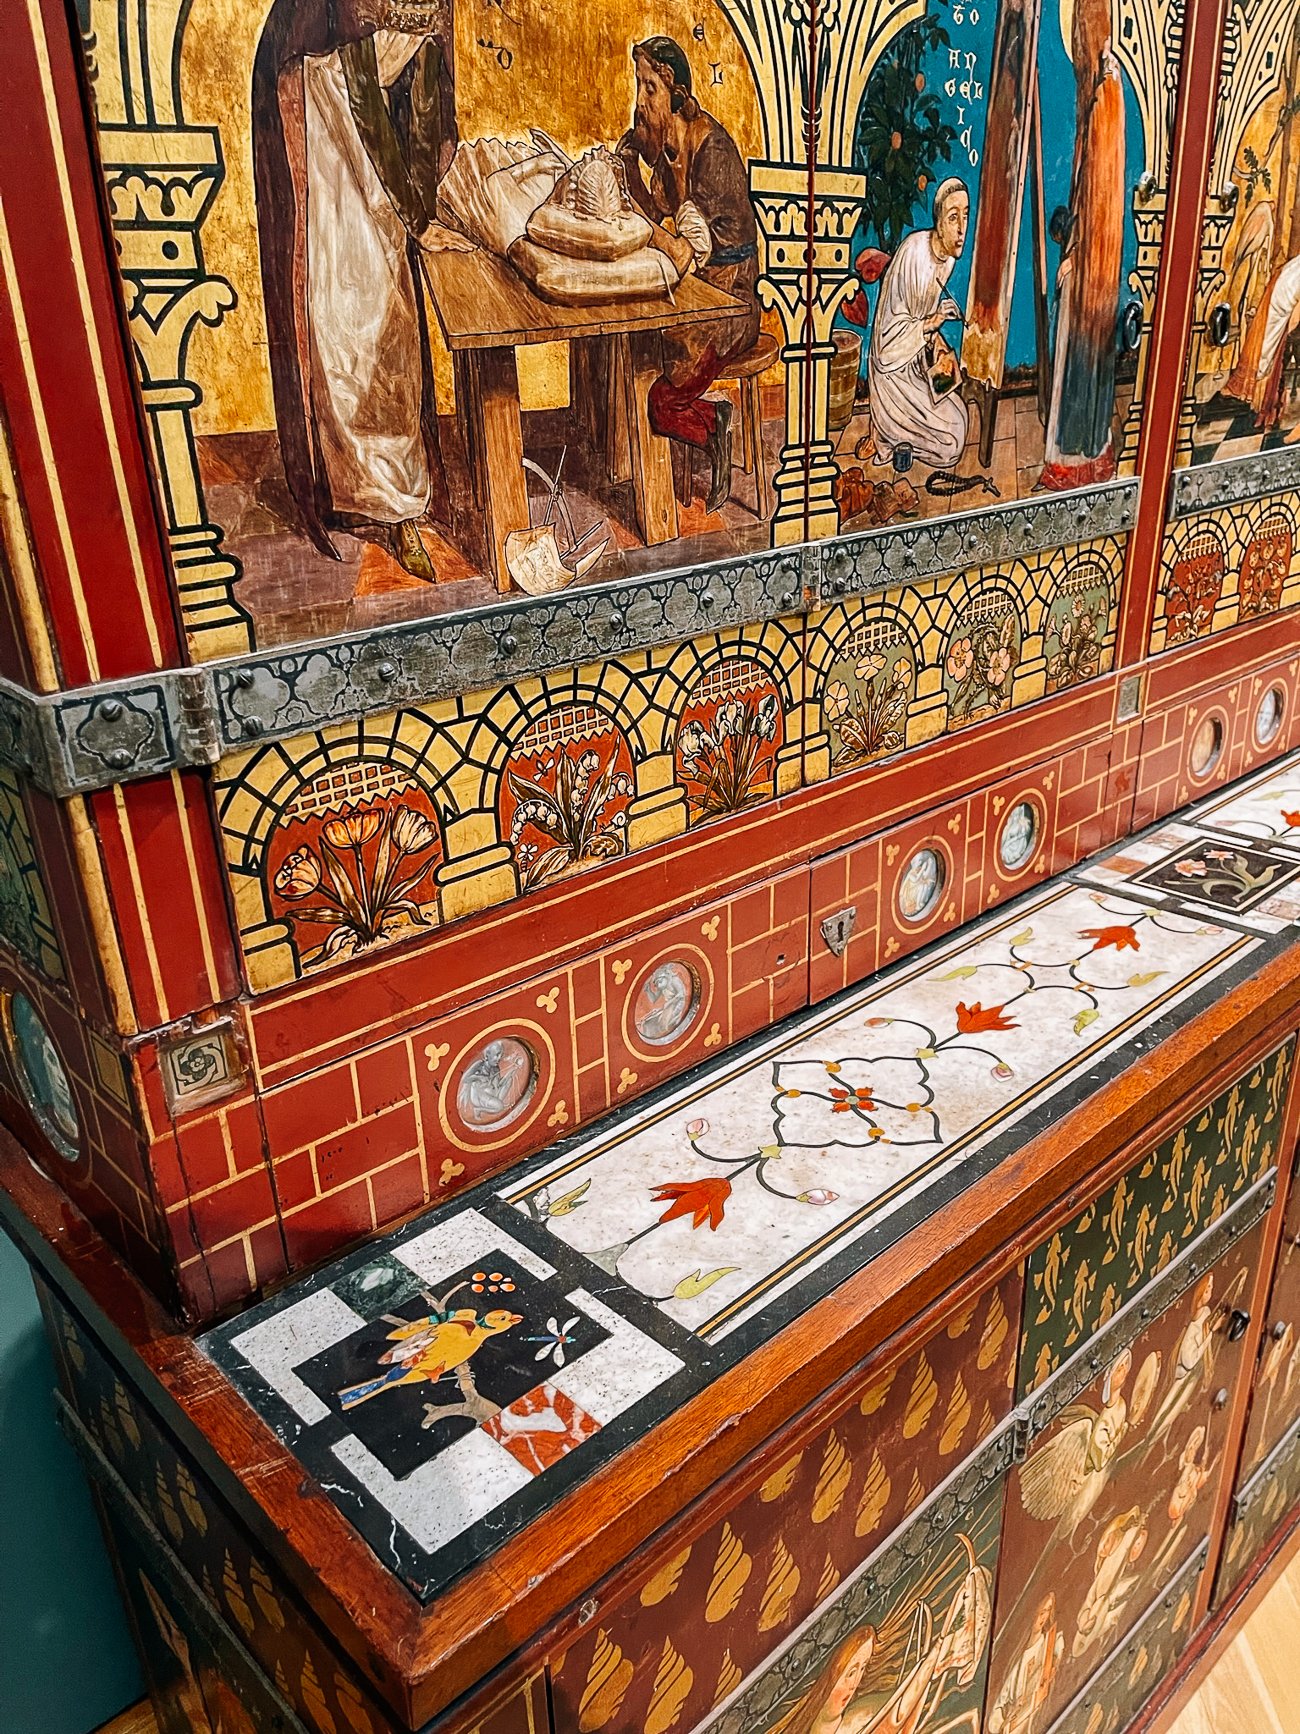 The Great Bookcase cabinet at the Ashmolean Museum in Oxford with ornate inlays